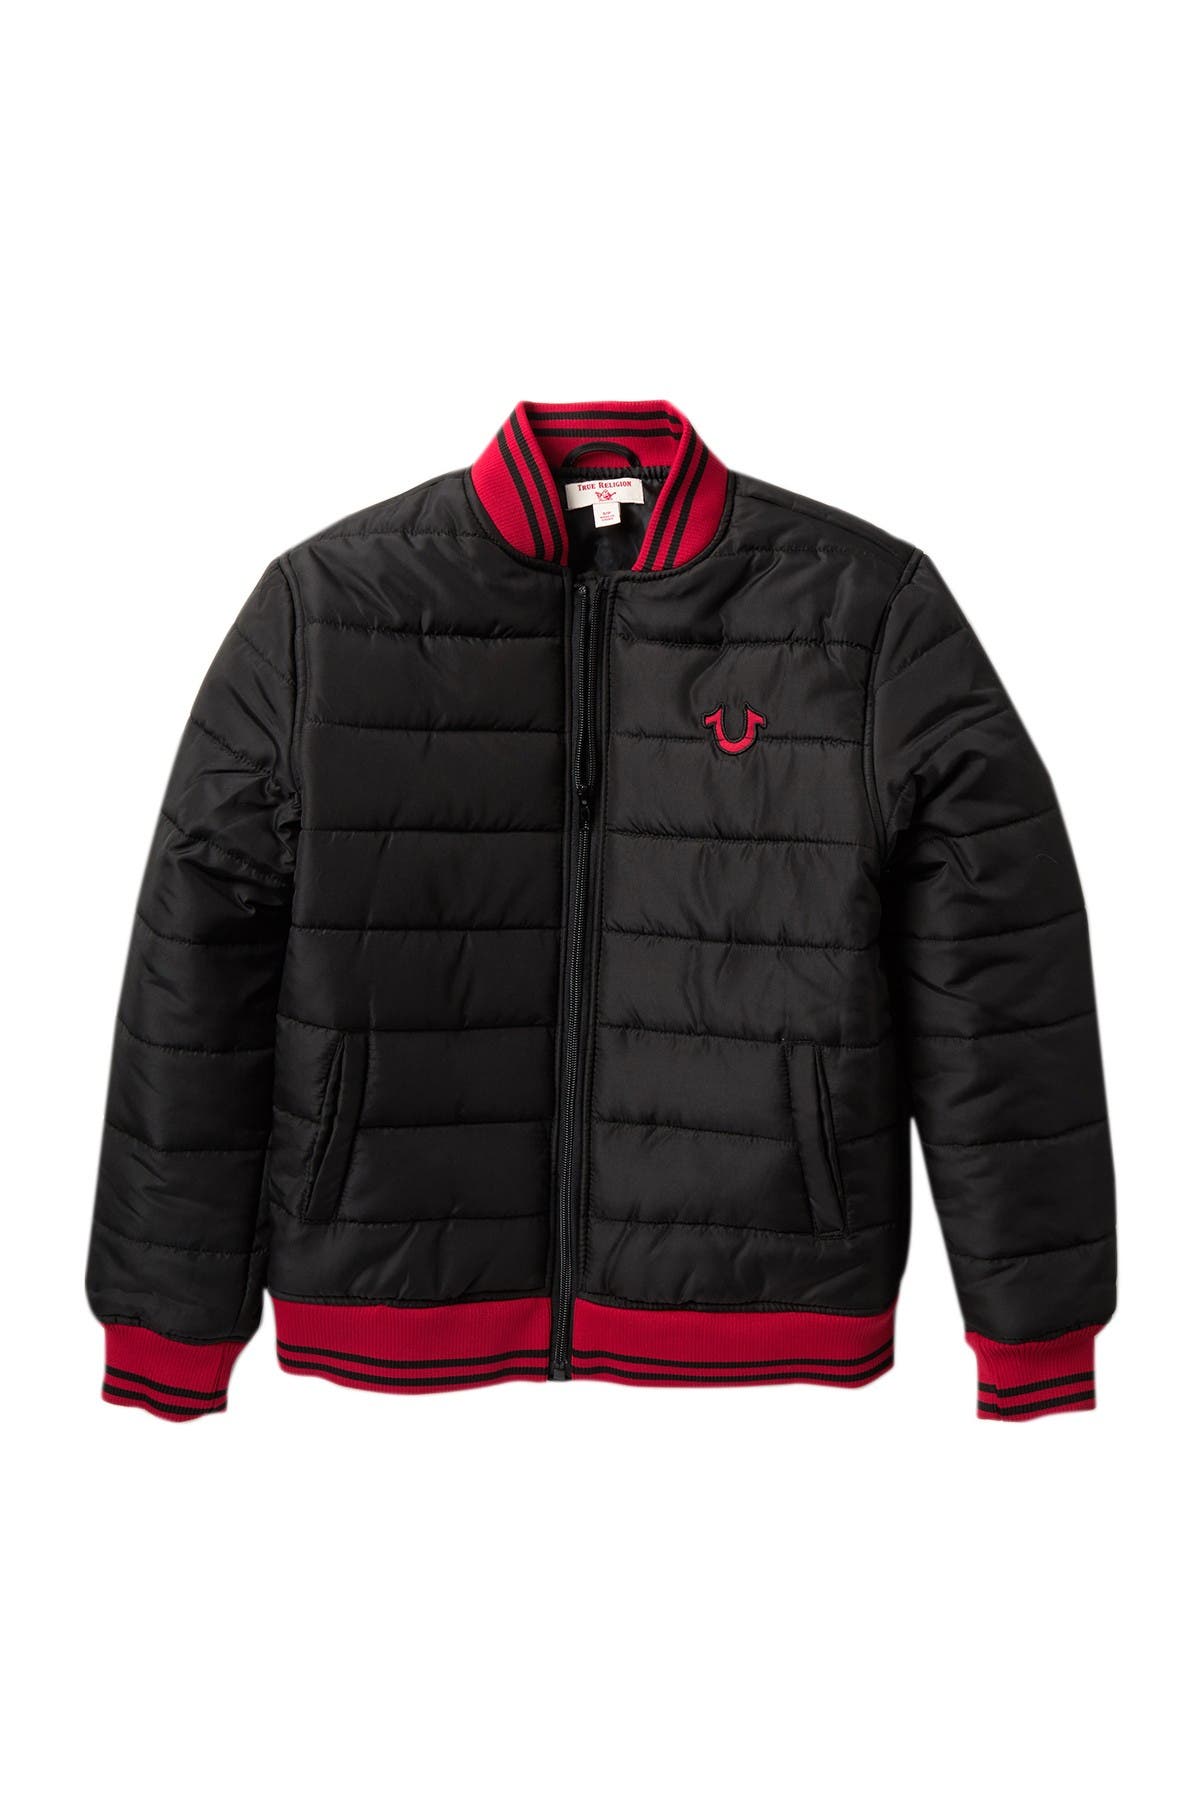 True Religion | Quilted Bomber Jacket 